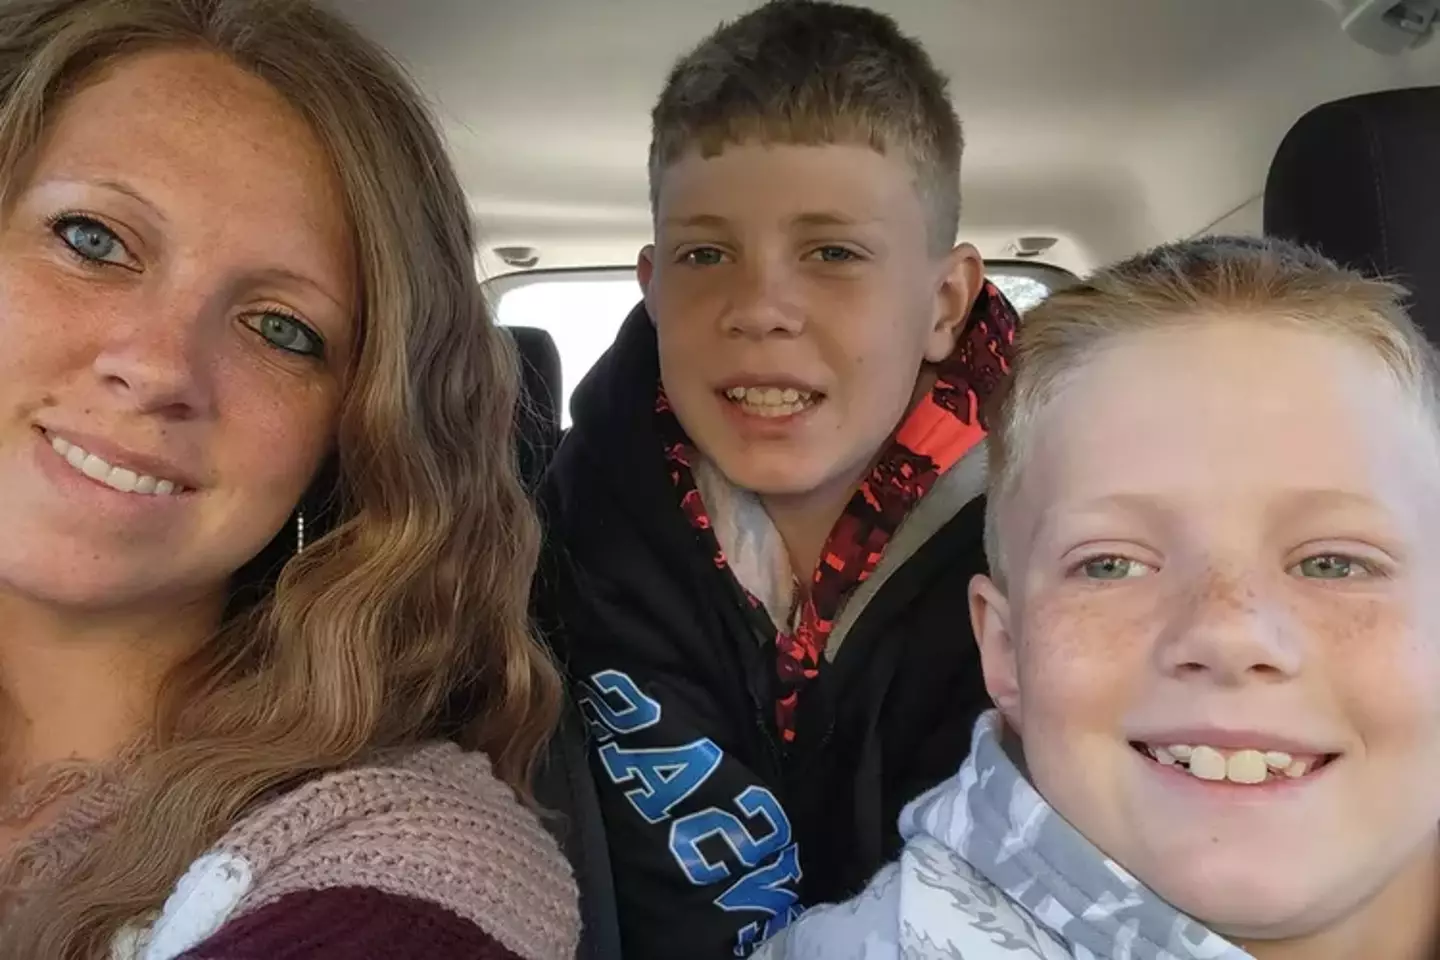 A mum and her two sons died in a suspected carbon monoxide poisoning.